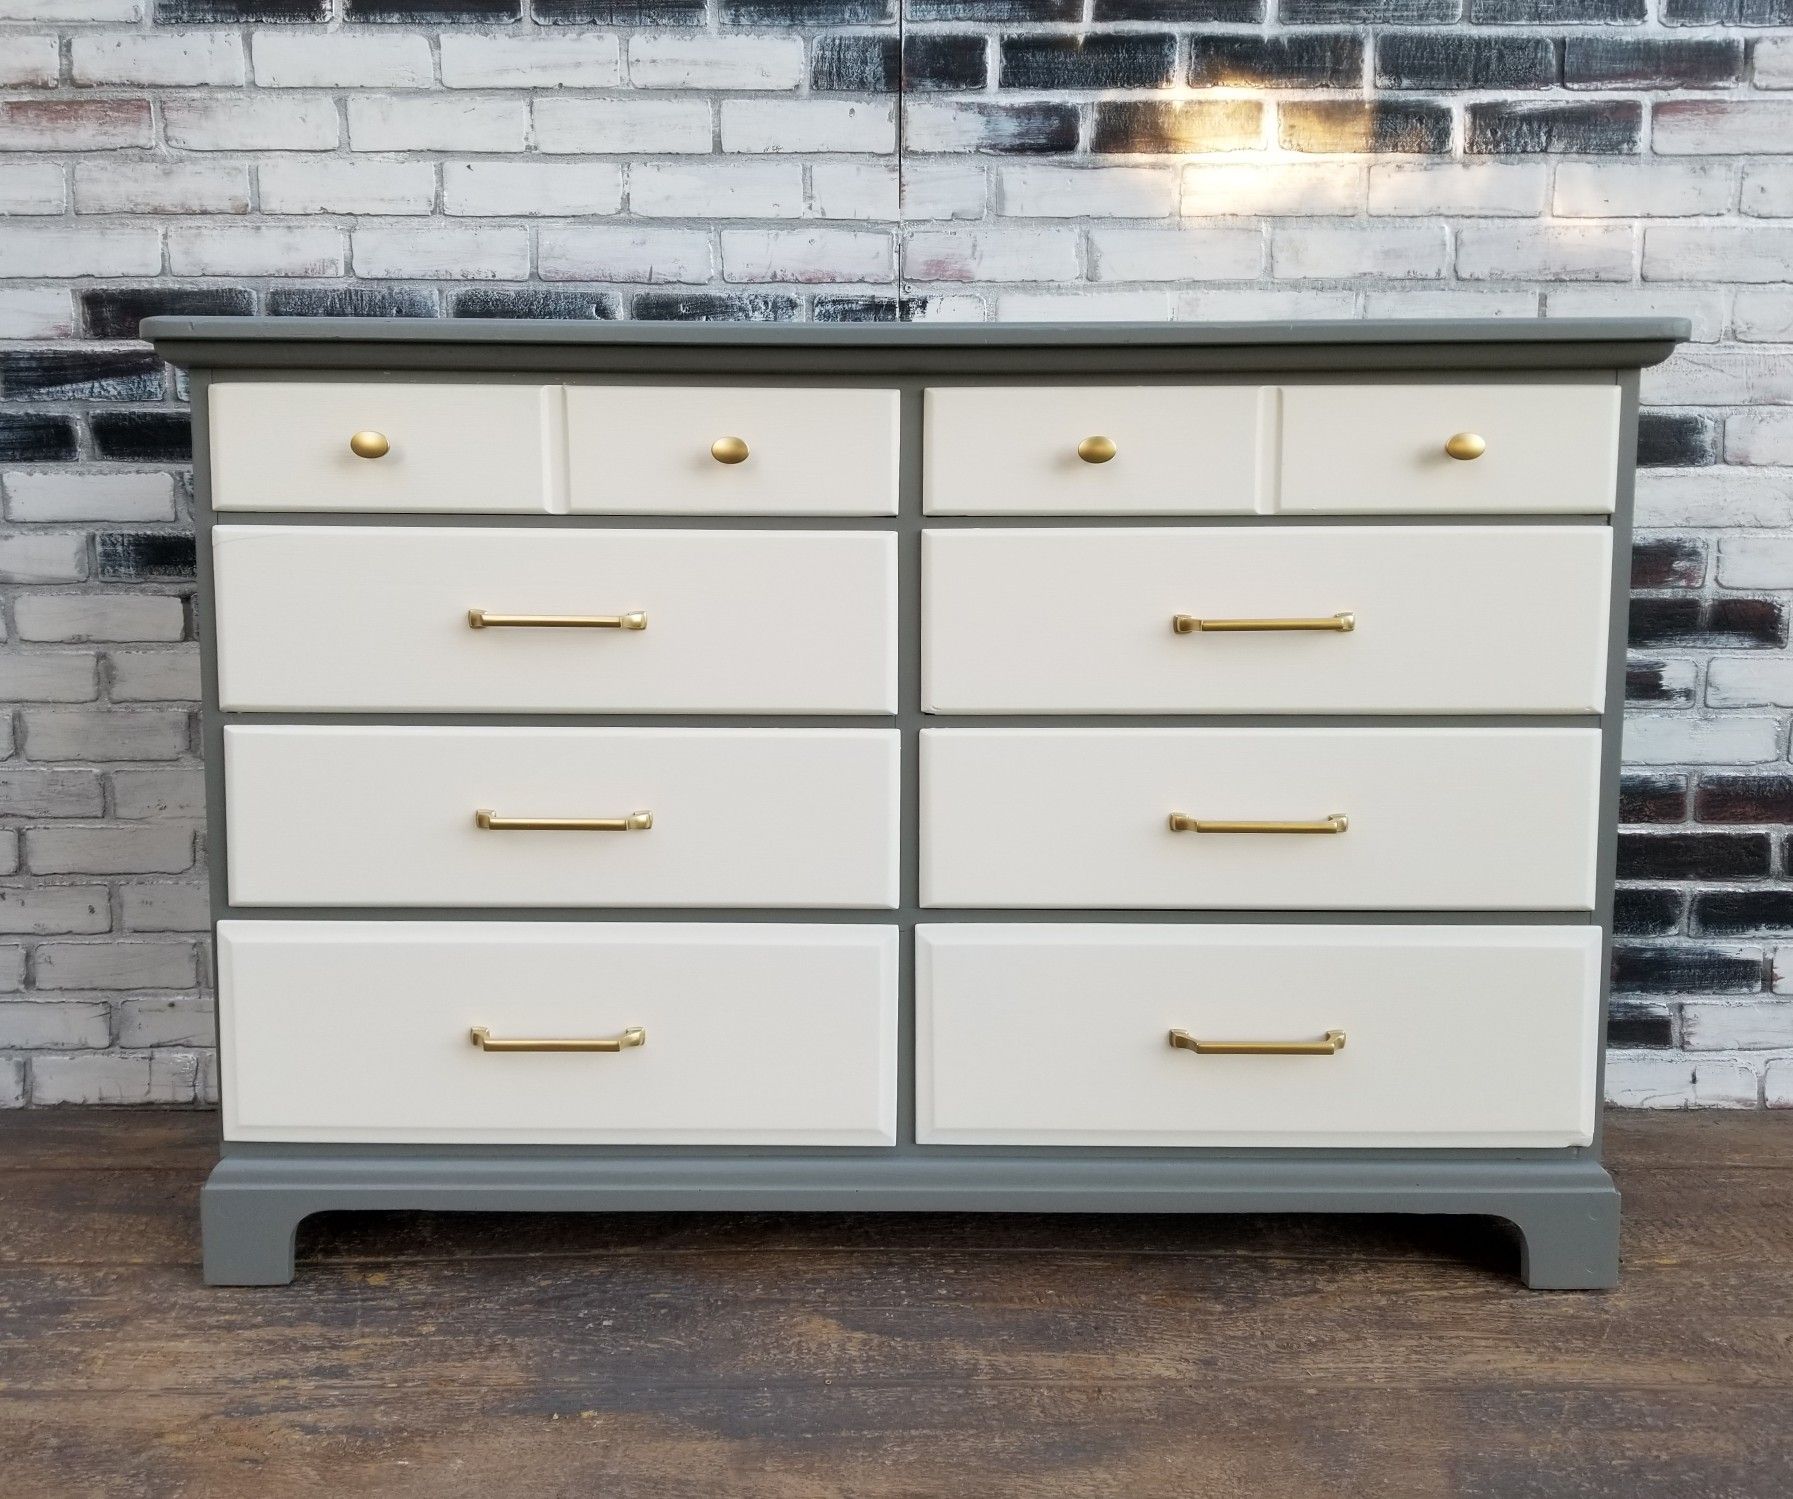 Credenza Dresser. 8 drawers. Stone gray / Off white / gold